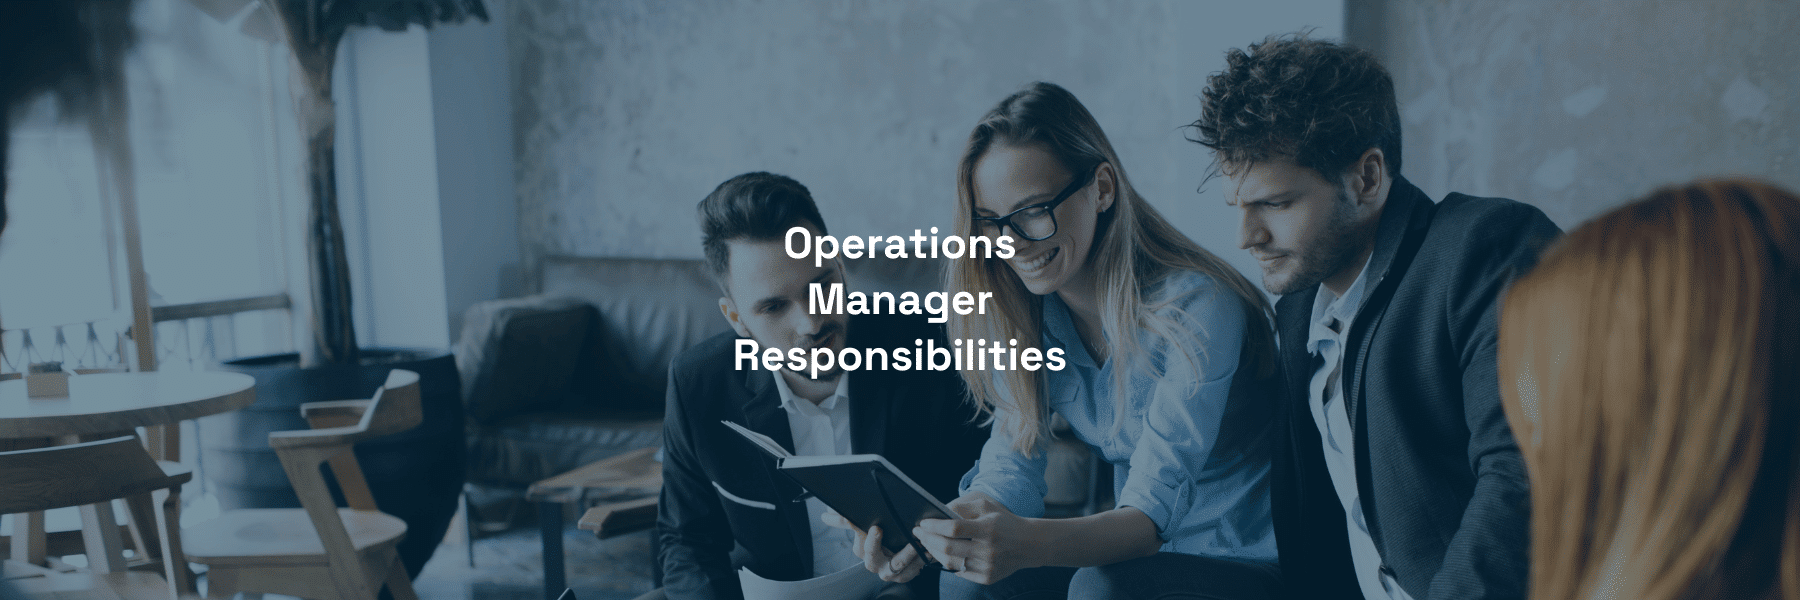 Operations Manager Responsibilities Banner